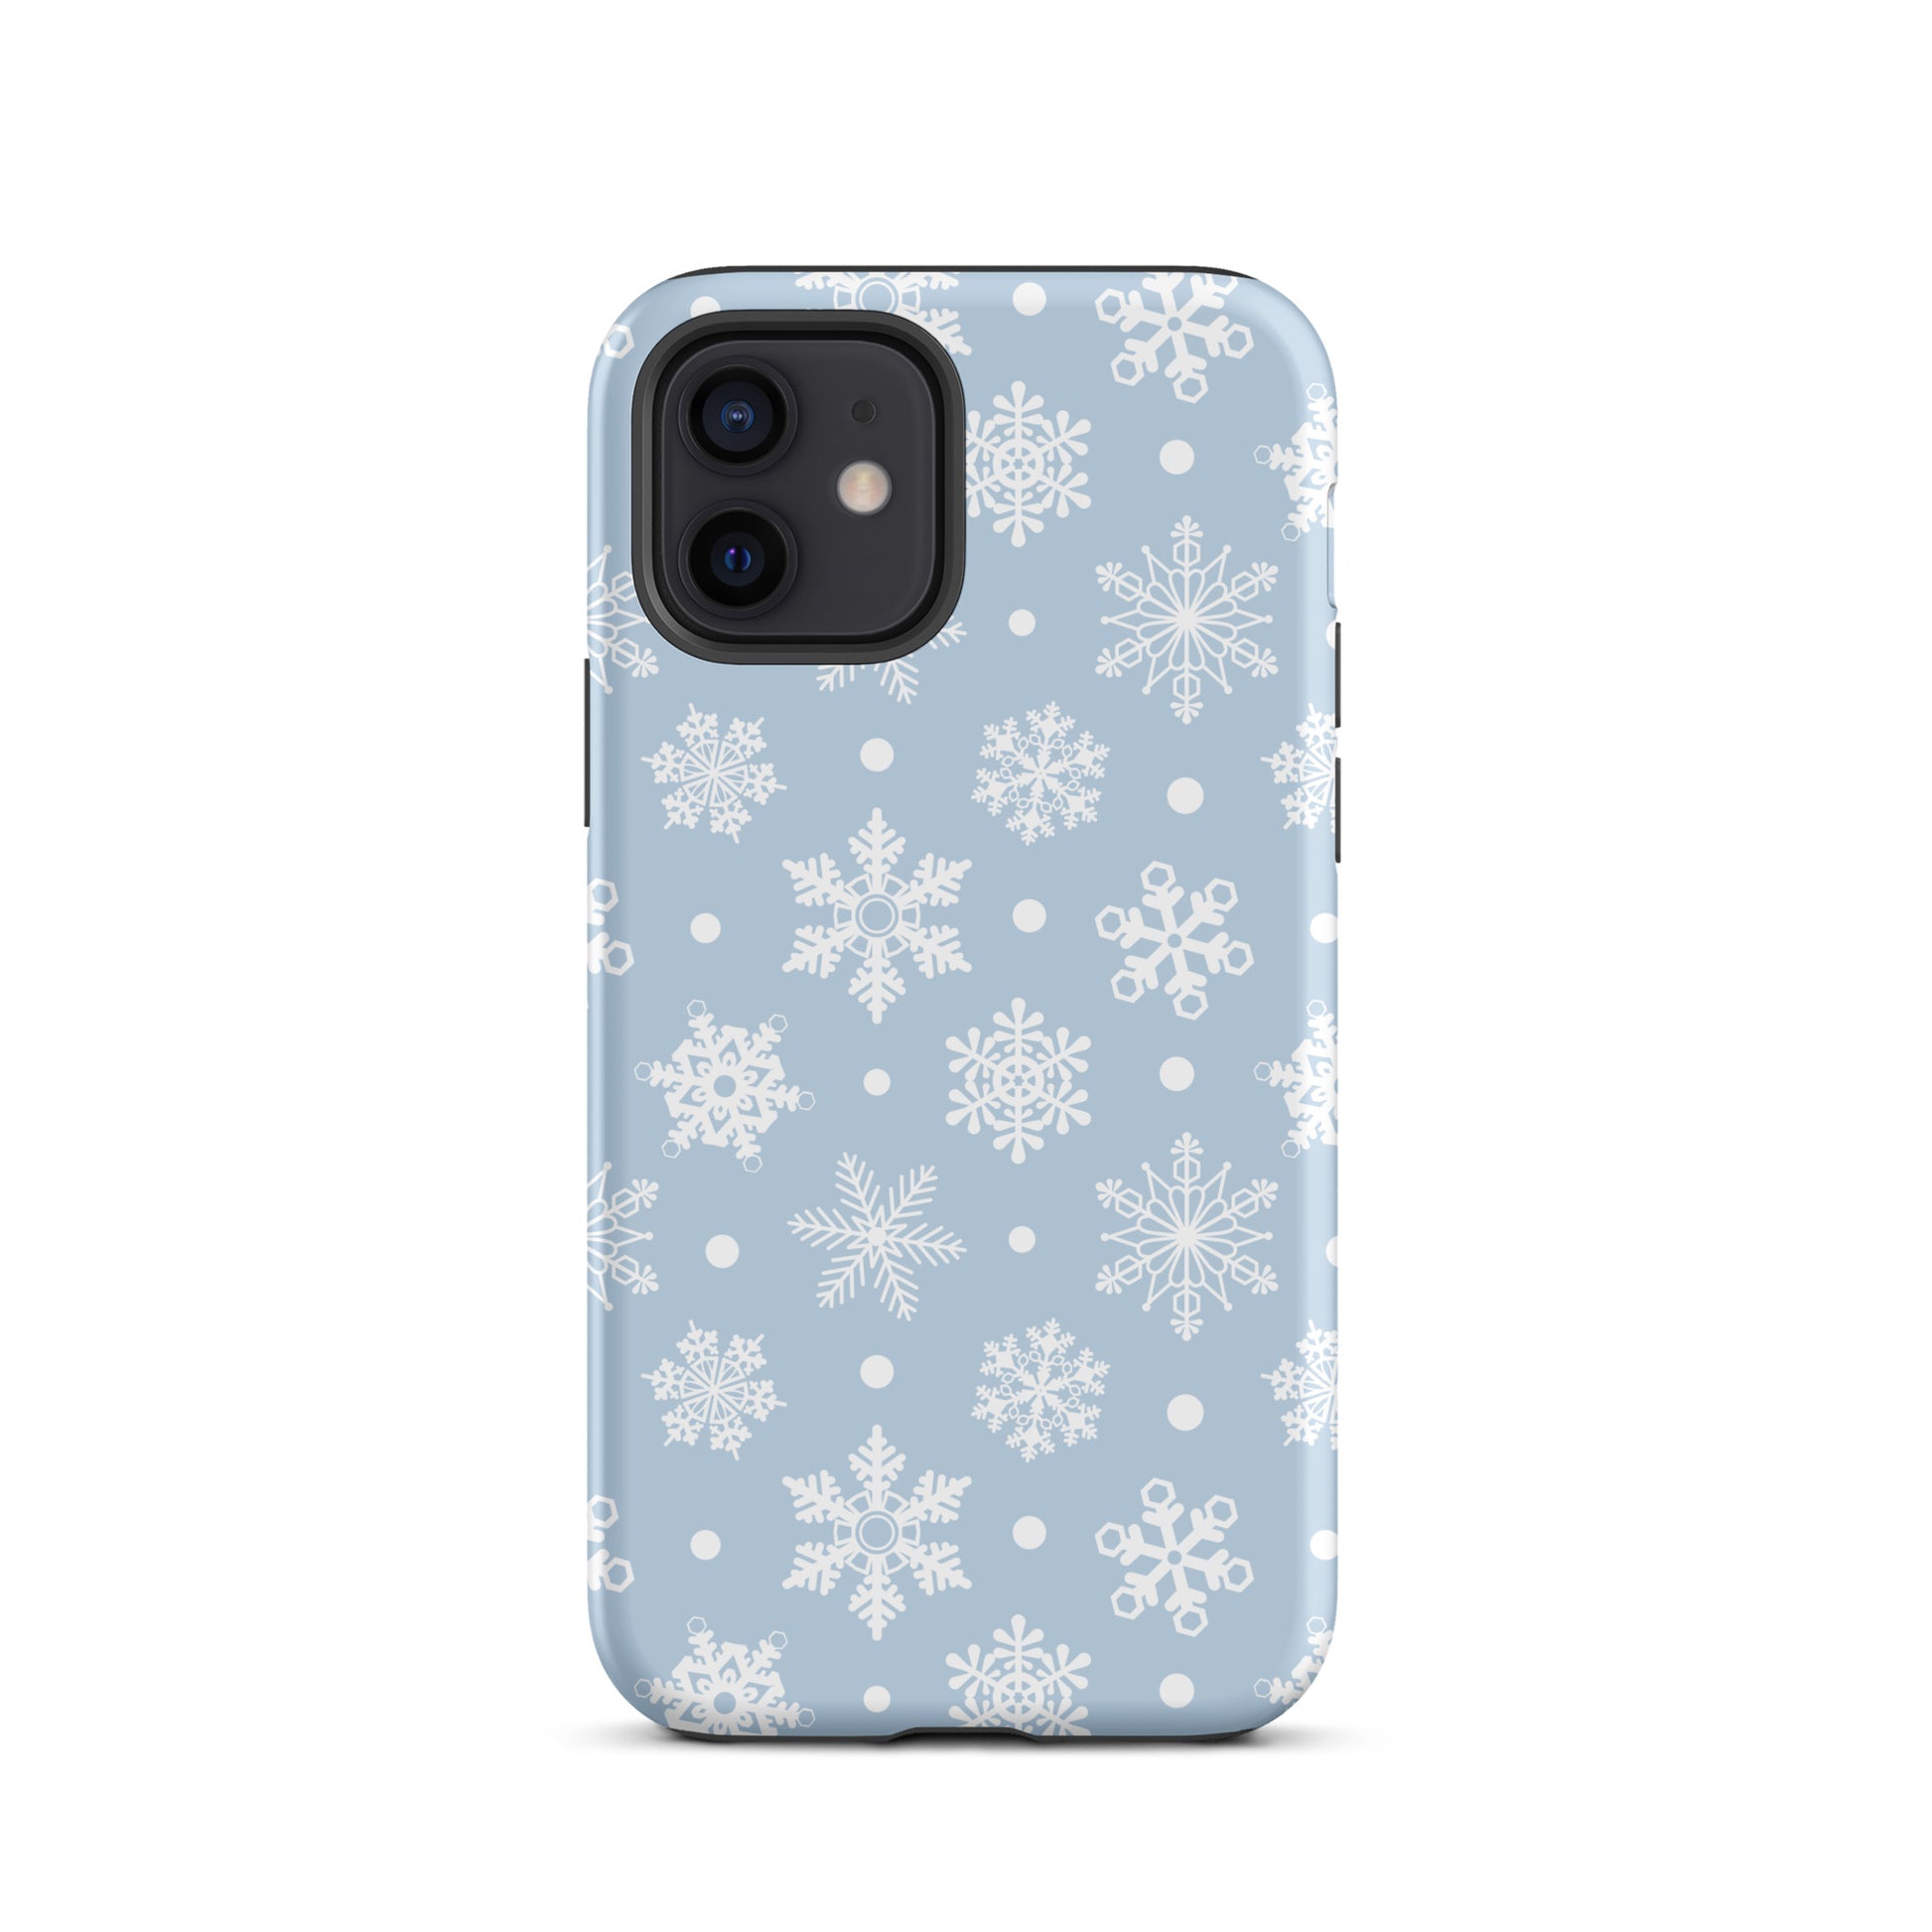 Snowflakes iPhone Case iPhone 12 Matte